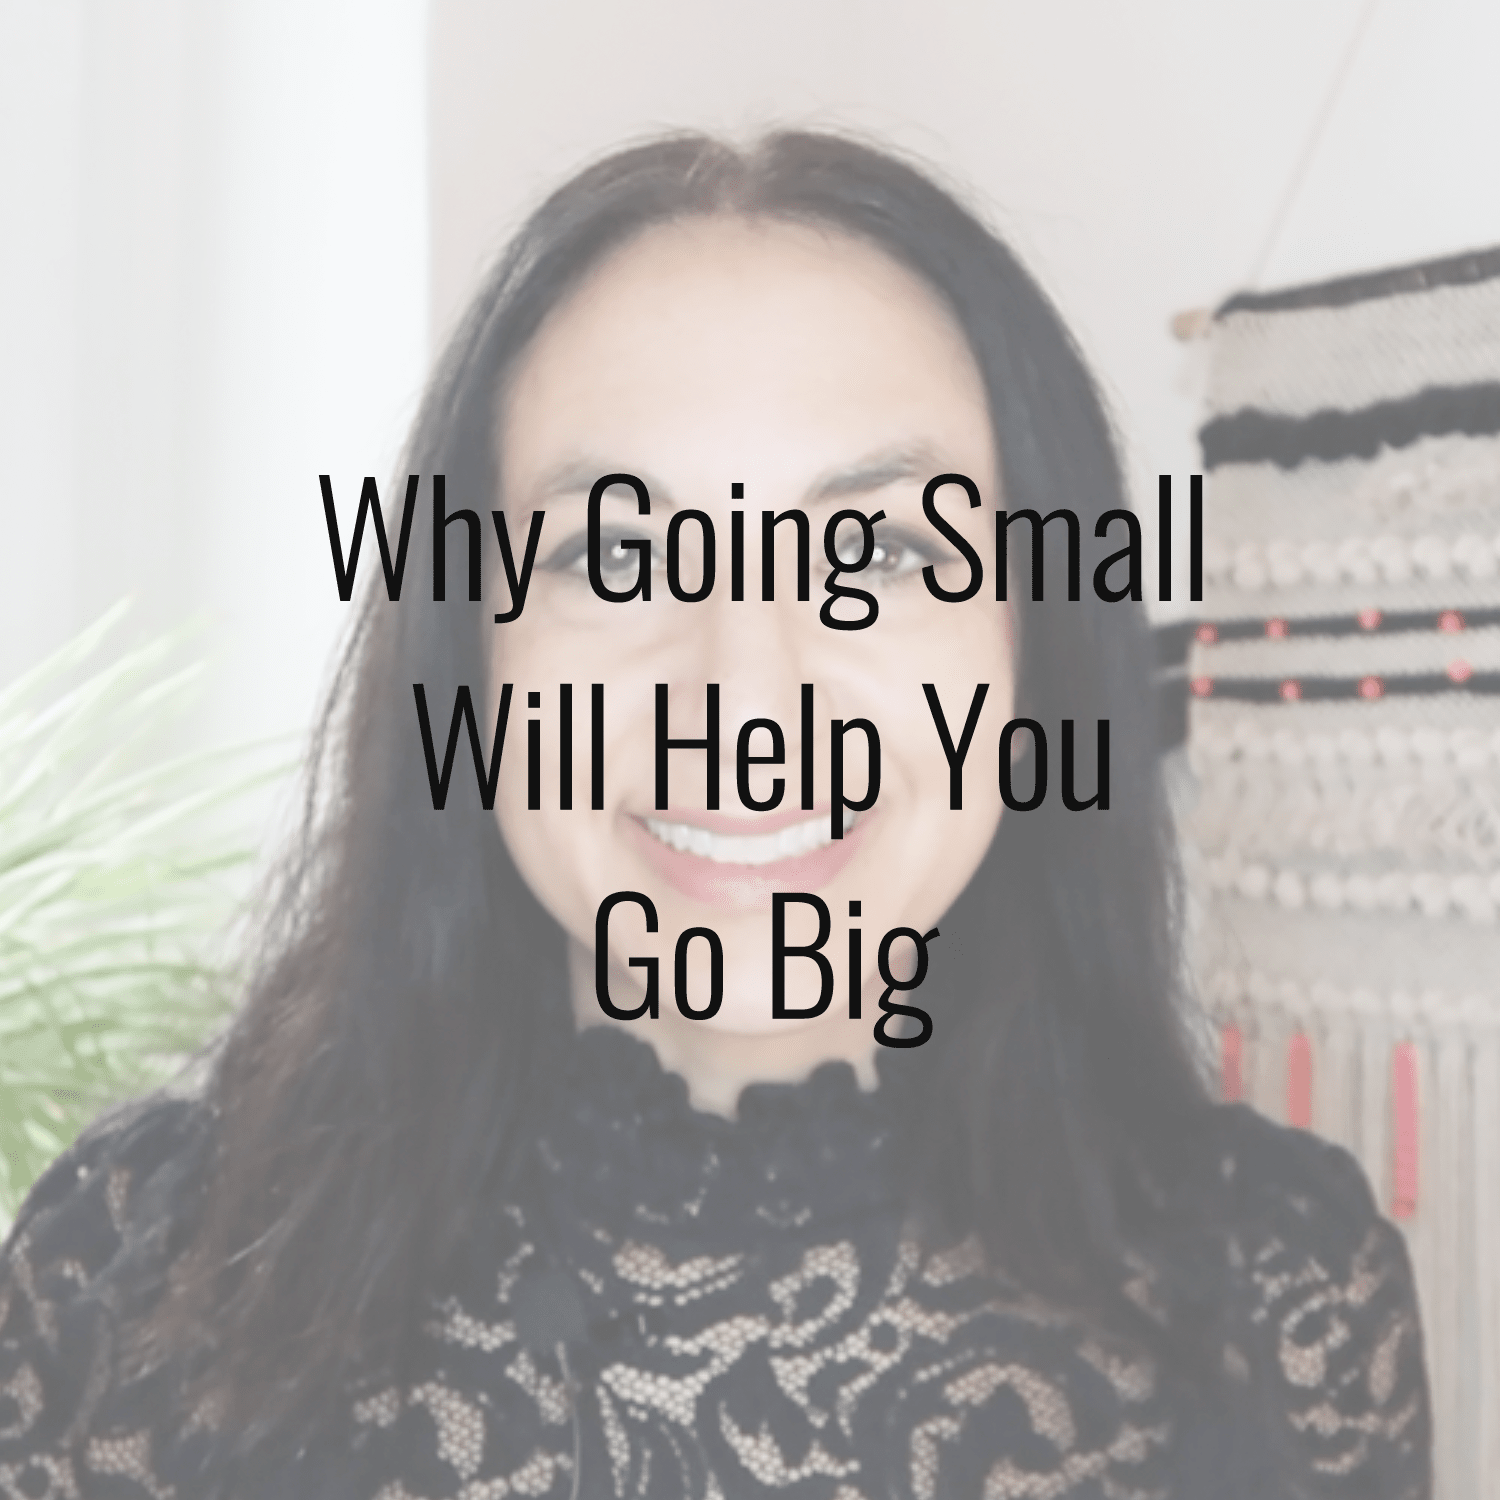 Why Going Small Will Help You Go BIG